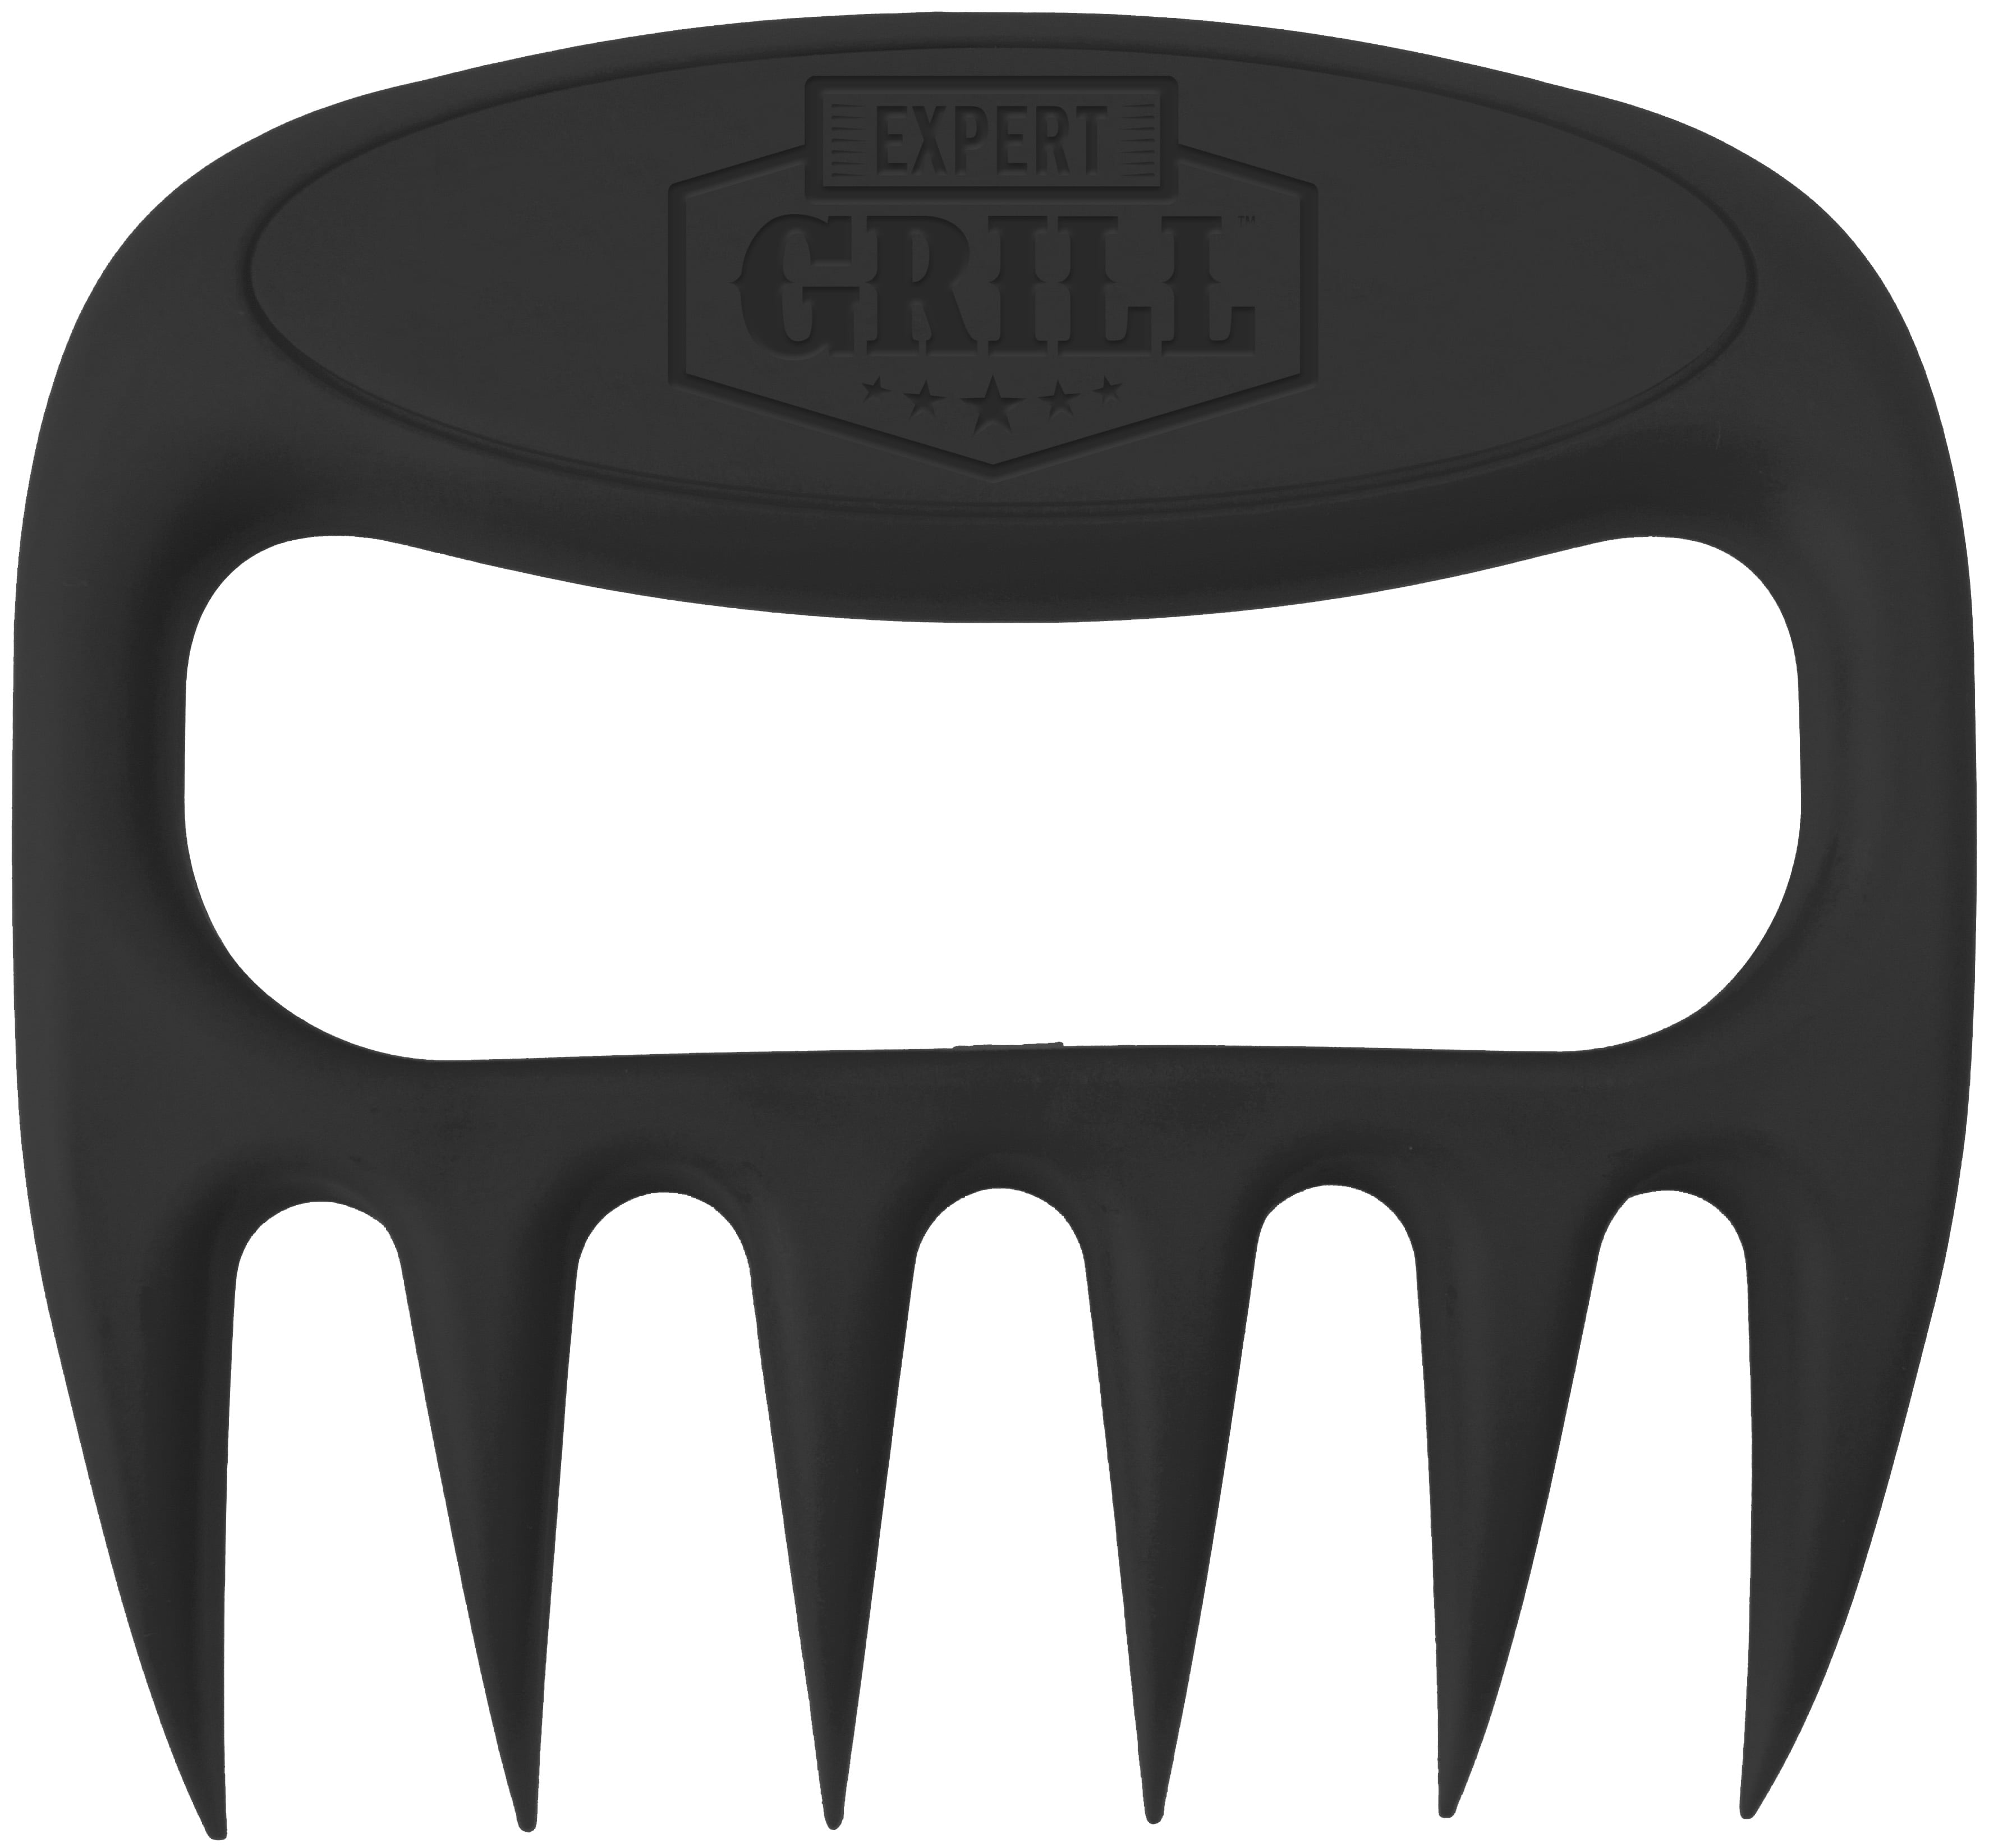 Chopped Processed Diced Meat QYCX BBQ Bear Claw-2 Pcs Black Full Solid BBQ Meat Shredder Claws/Culinary Couture Claws/Meat Perfect Cut Fork or Meat Handling-Smoked Barbecue Grilling Accessories for Family Dinners